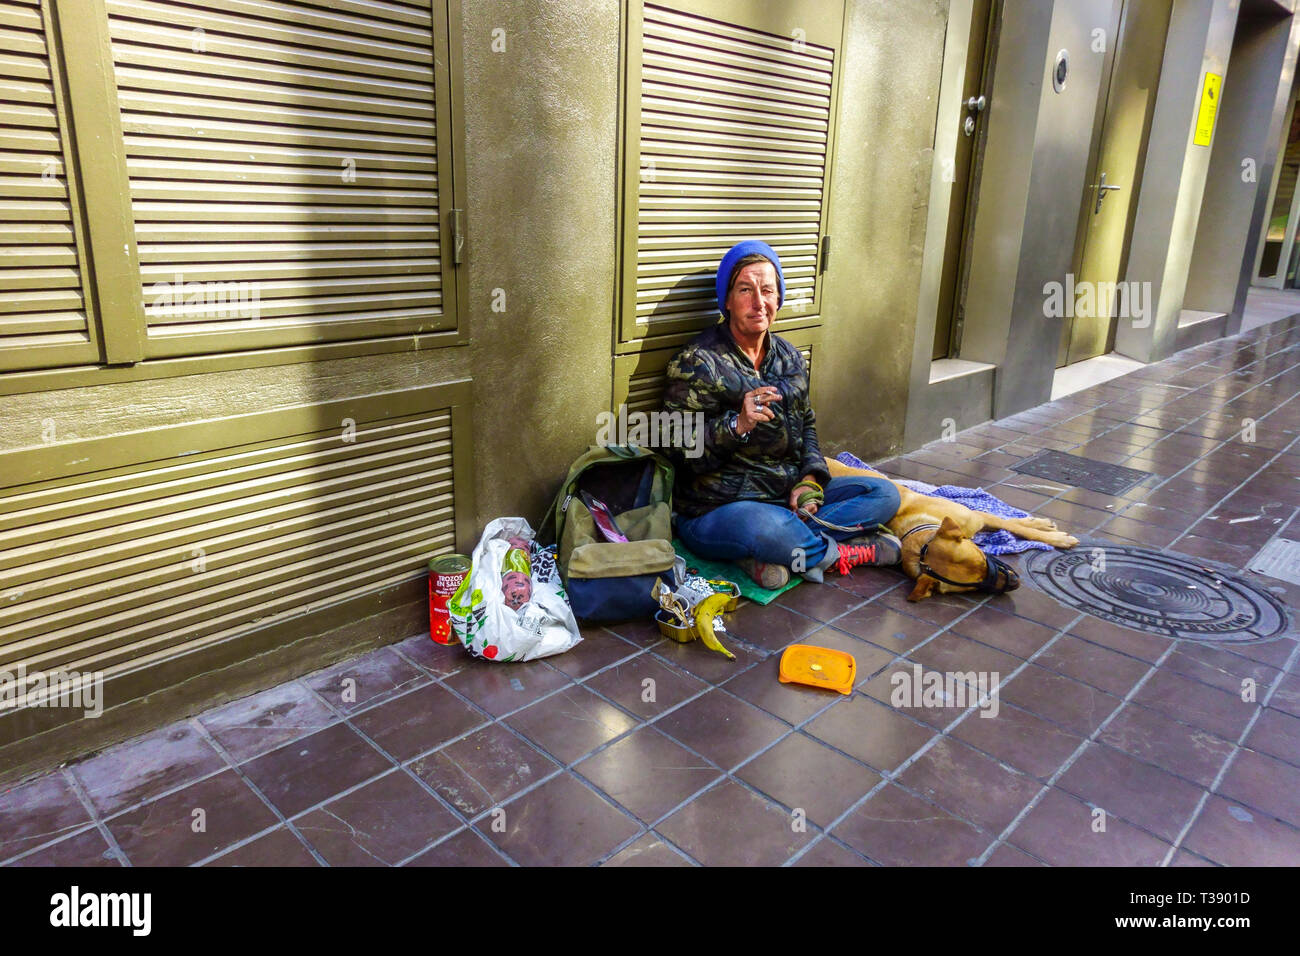 Homeless woman street begging in the city center with her dog, Valencia, Spain Europe woman begging in street Stock Photo